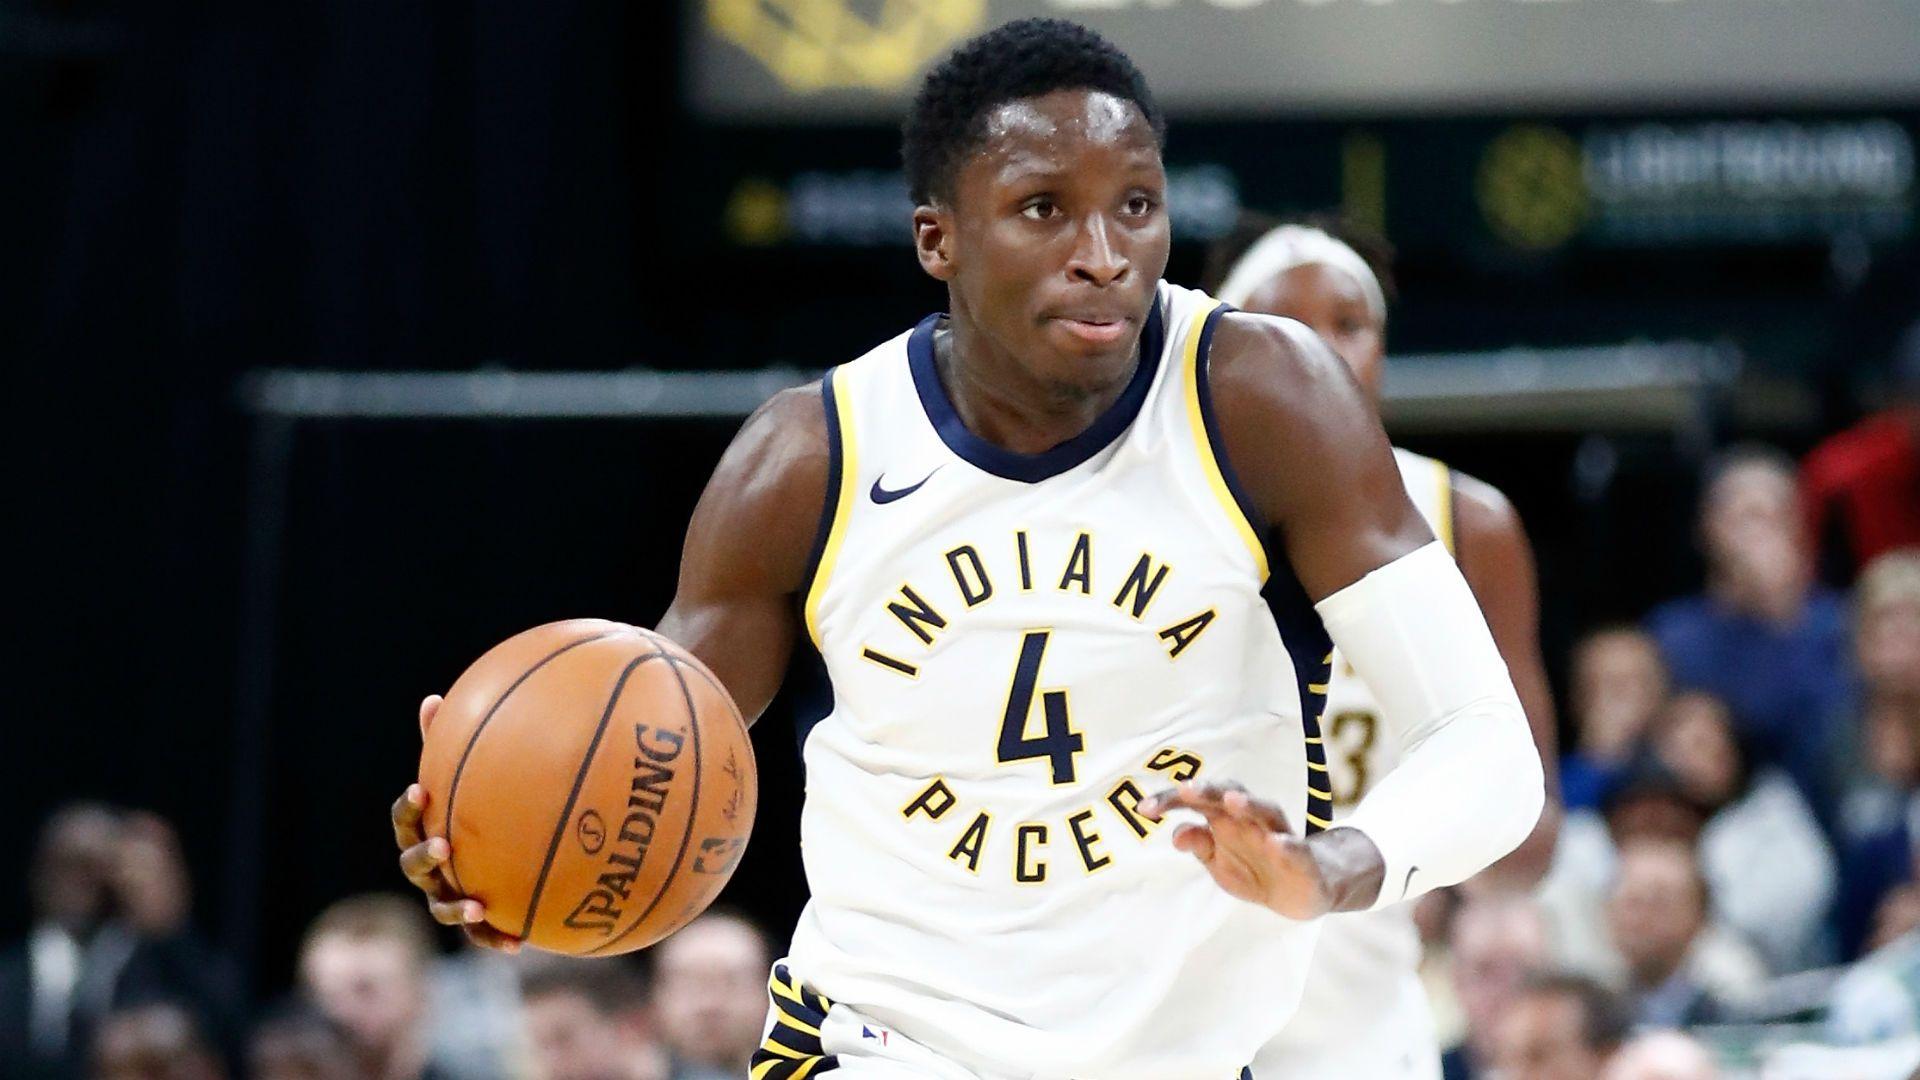 NBA wrap: Victor Oladipo's career performance keeps Pacers rolling